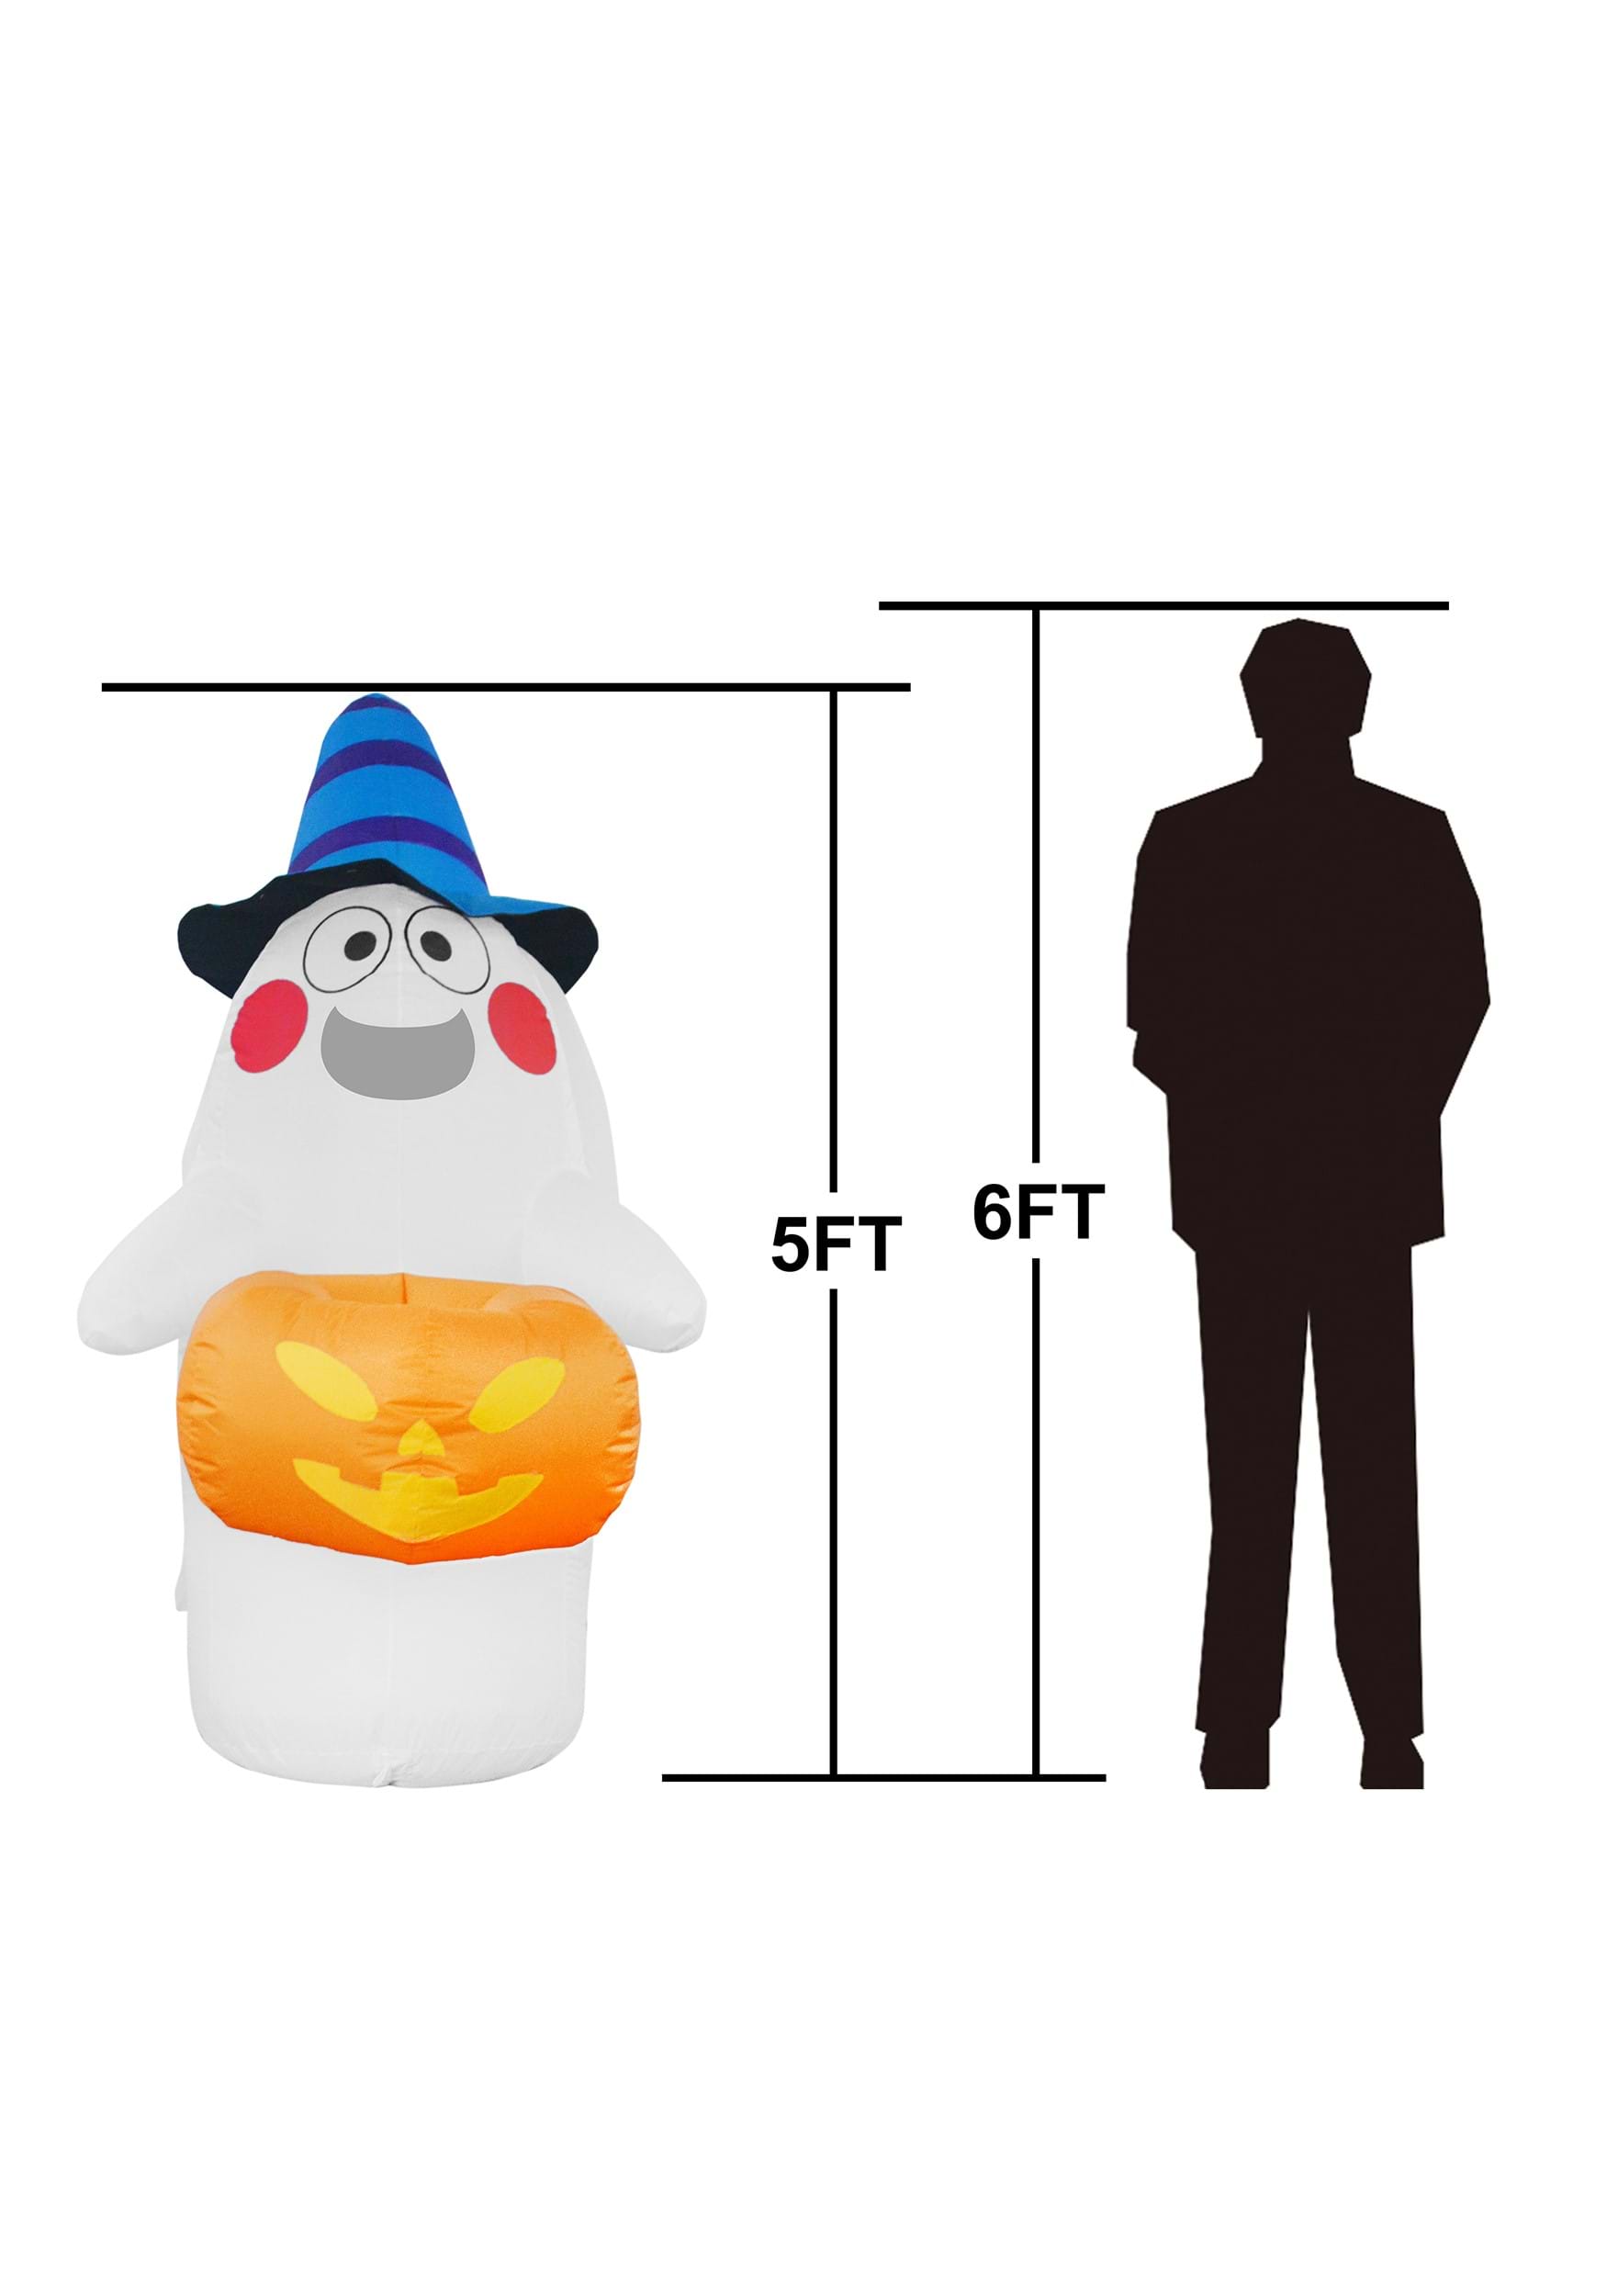 Candy Basket Ghost Inflatable 5FT Tall Decoration